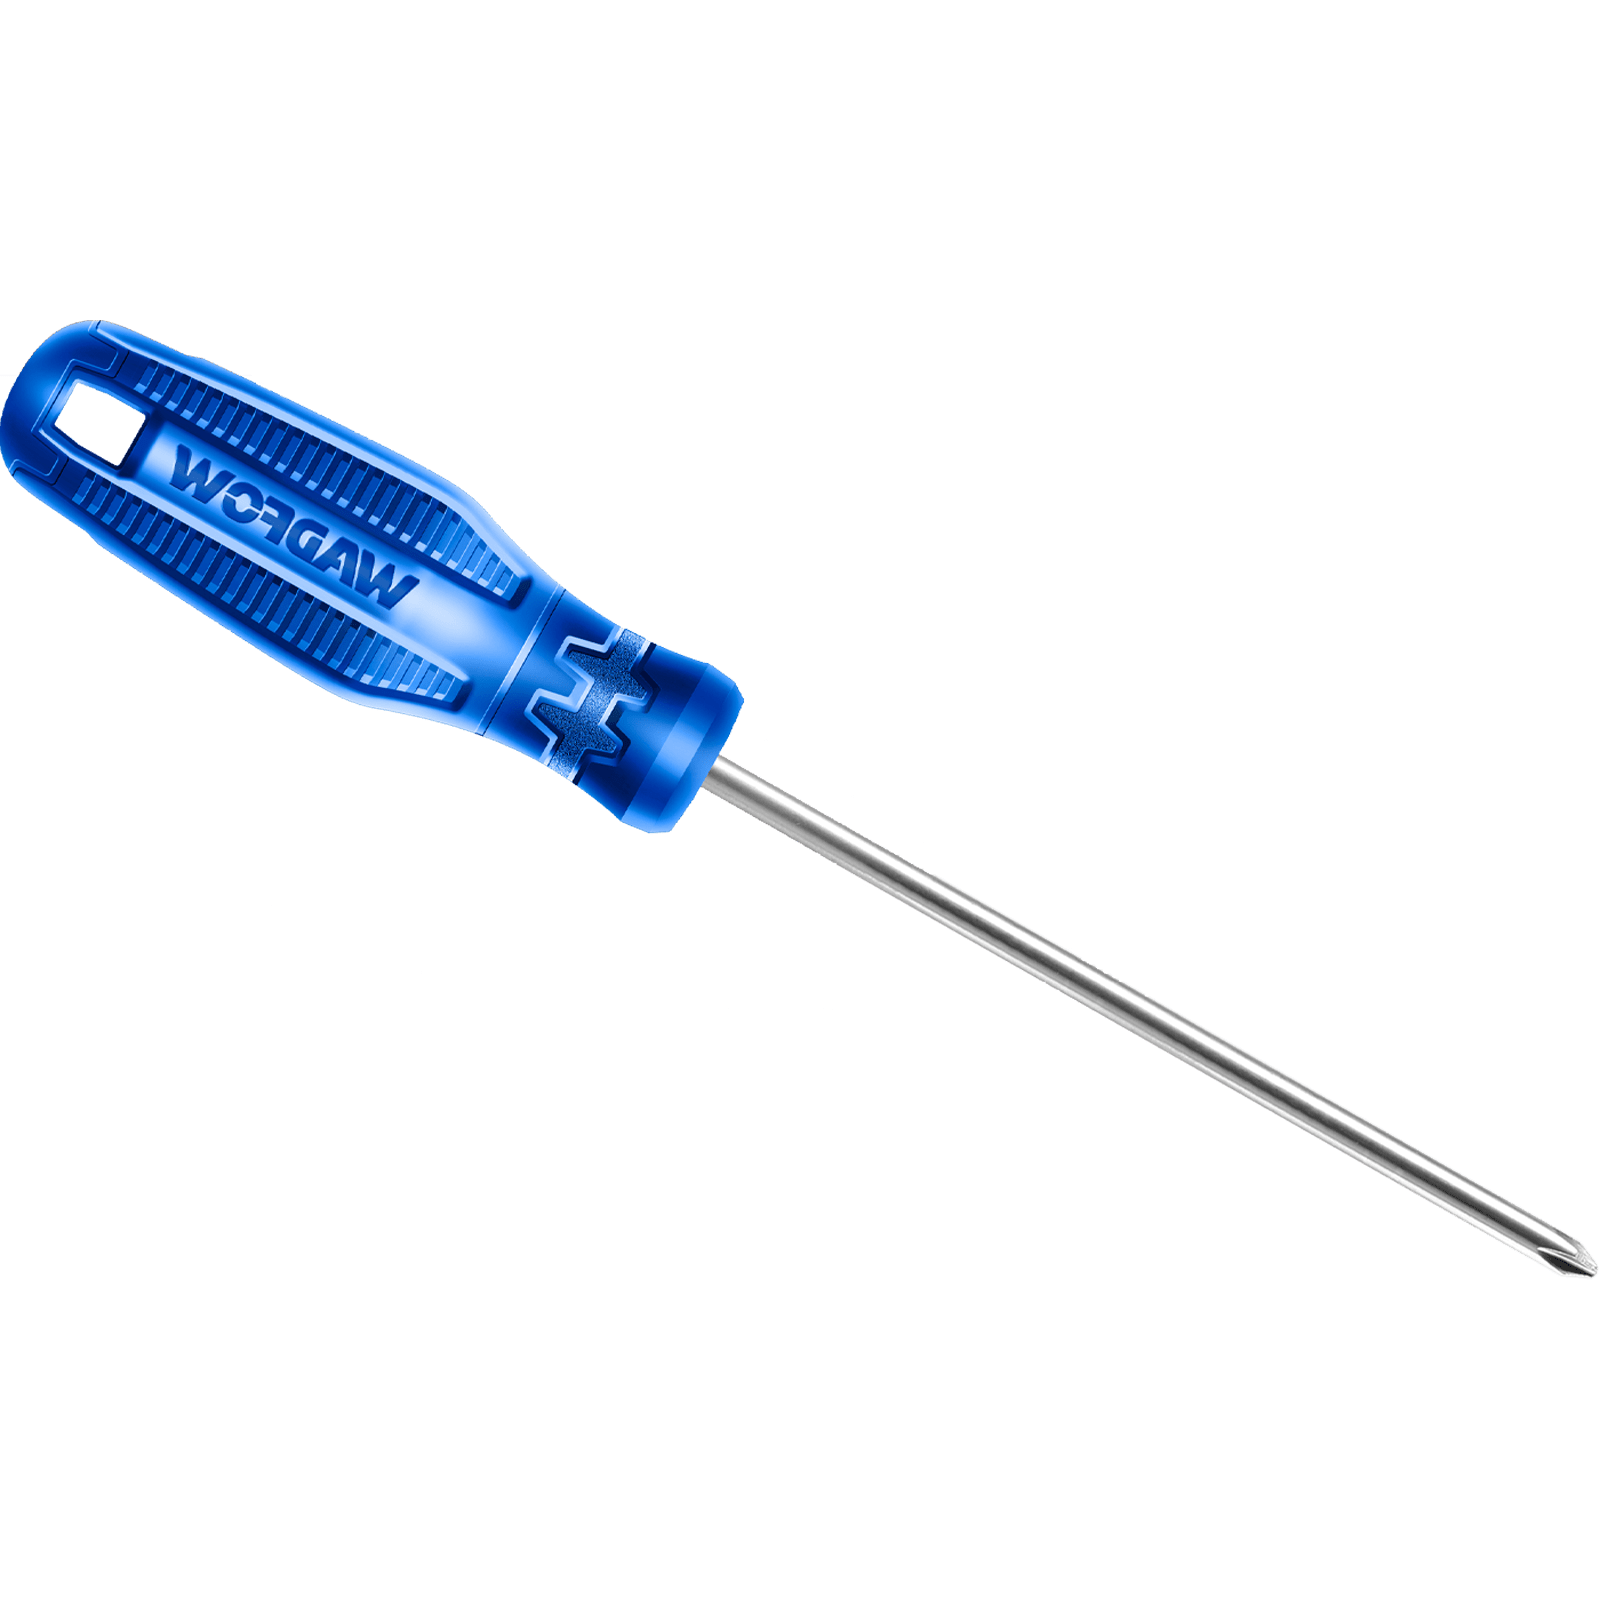 Wadfow 5.0x100mm Philips Screwdriver (WSD4914) | Supply Master Accra, Ghana Screwdrivers Buy Tools hardware Building materials